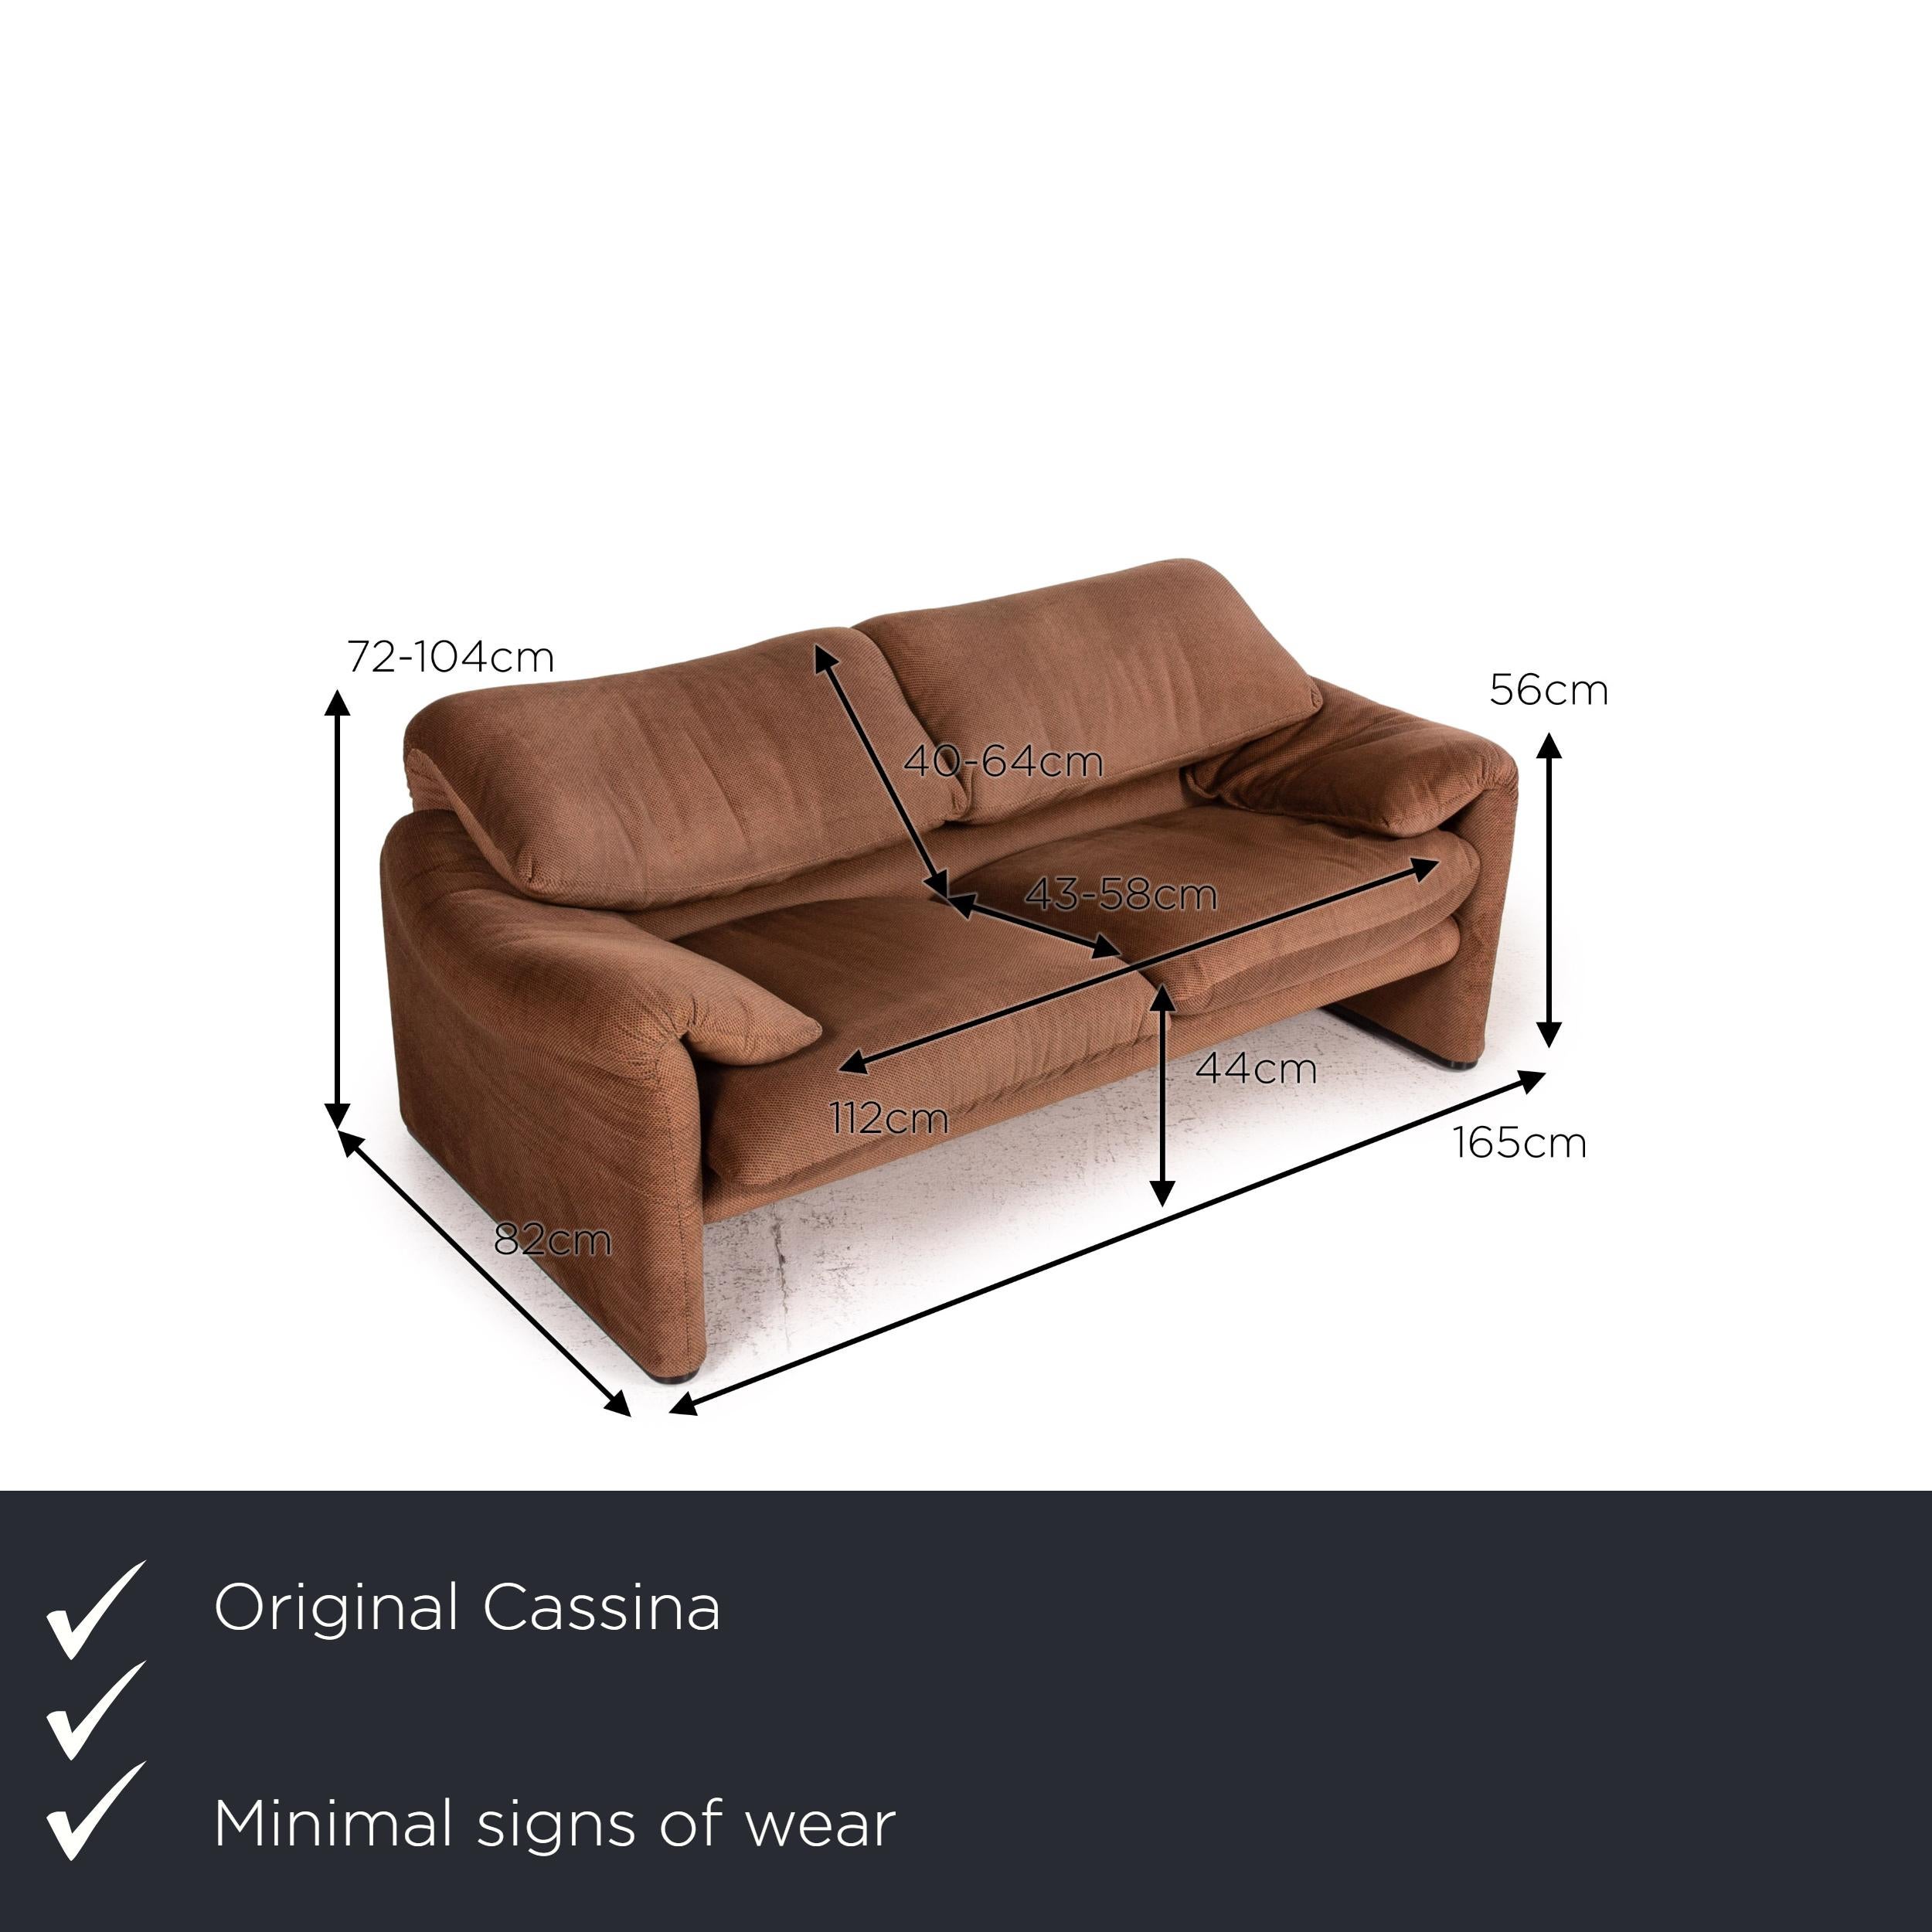 We present to you a Cassina maralunga fabric sofa brown two-seater function couch.
 

 Product measurements in centimeters:
 

Depth: 82
Width: 165
Height: 72
Seat height: 44
Rest height: 56
Seat depth: 43
Seat width: 112
Back height: